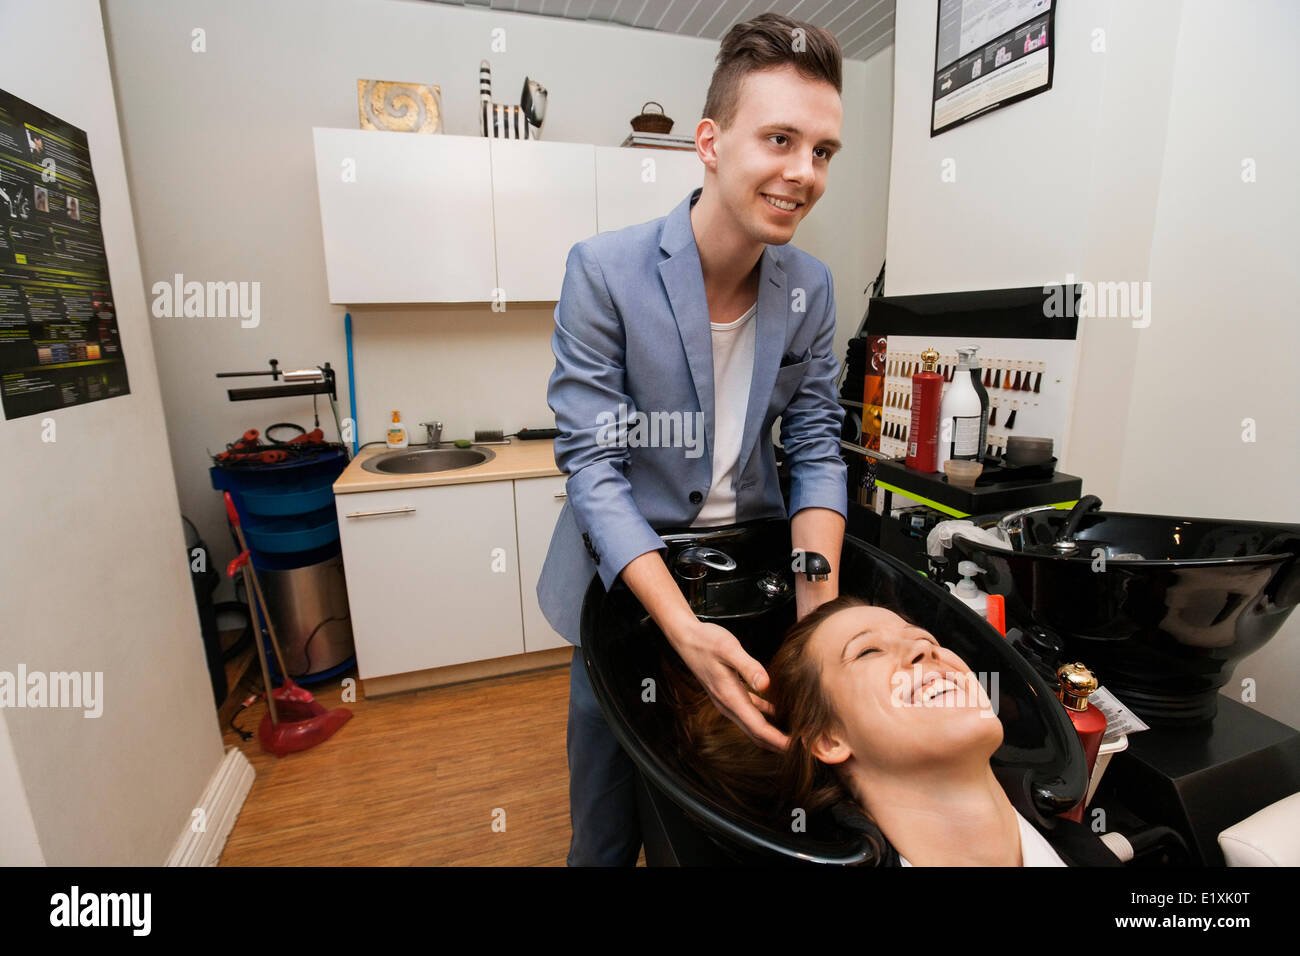 Smiling male hairstylist washing female customer's hair in salon Stock Photo